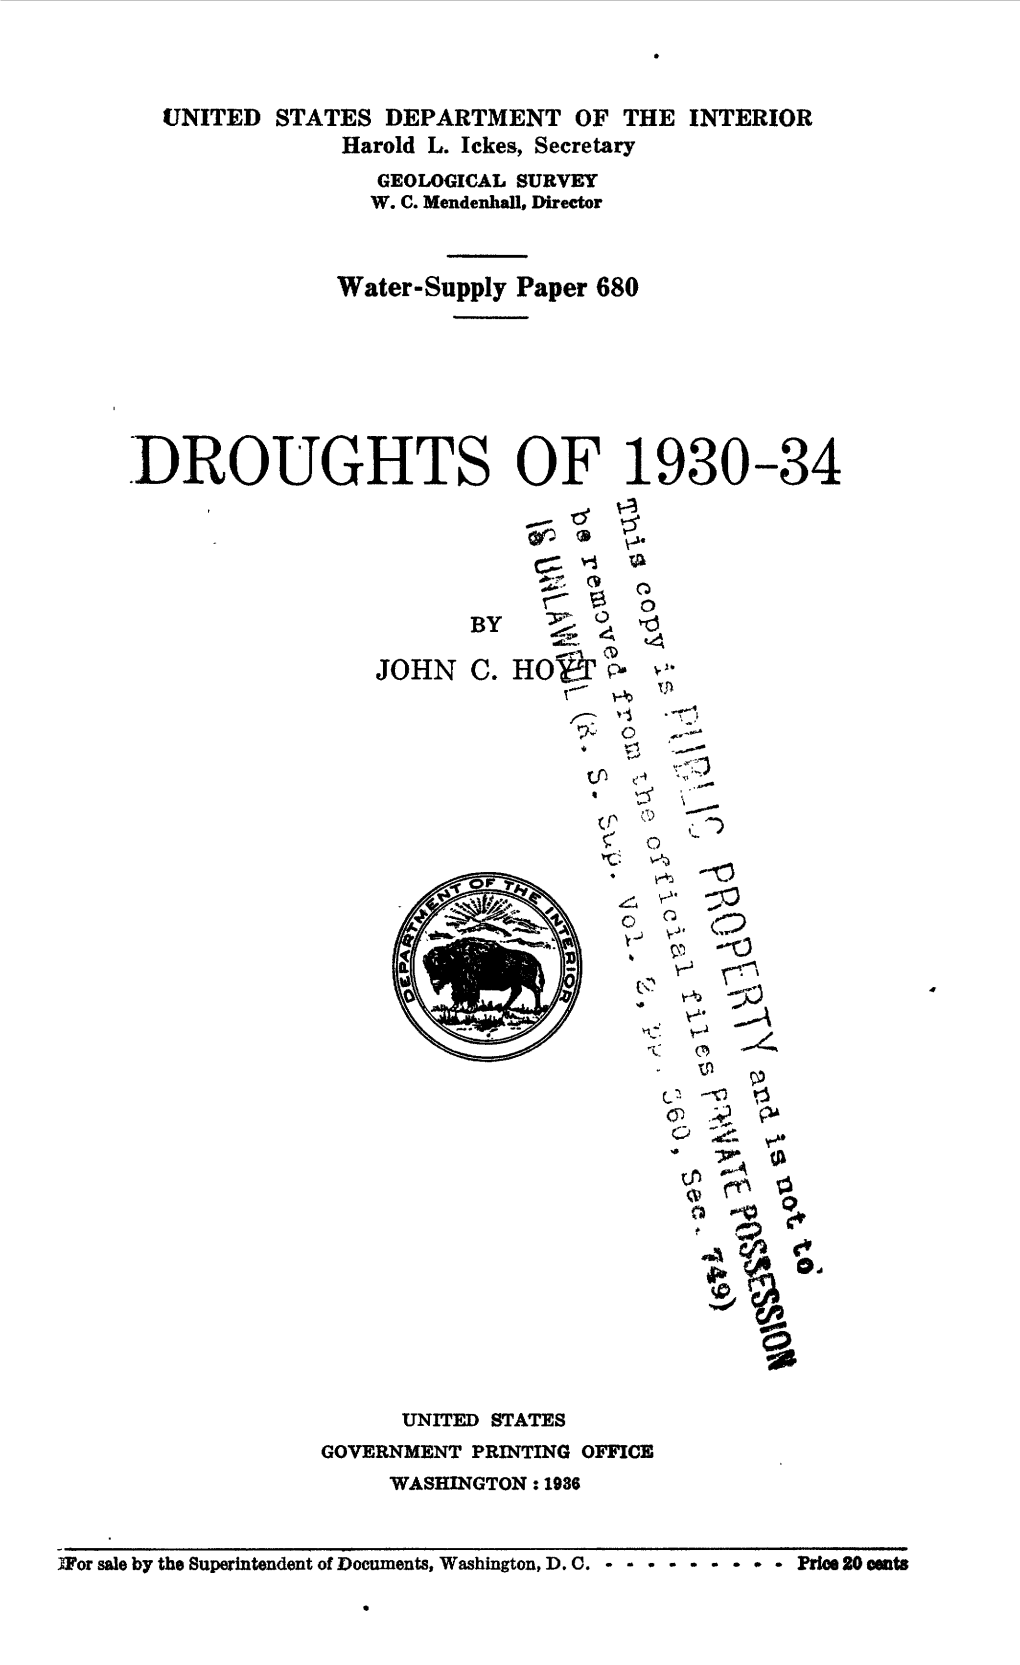 Droughts of 1930-34